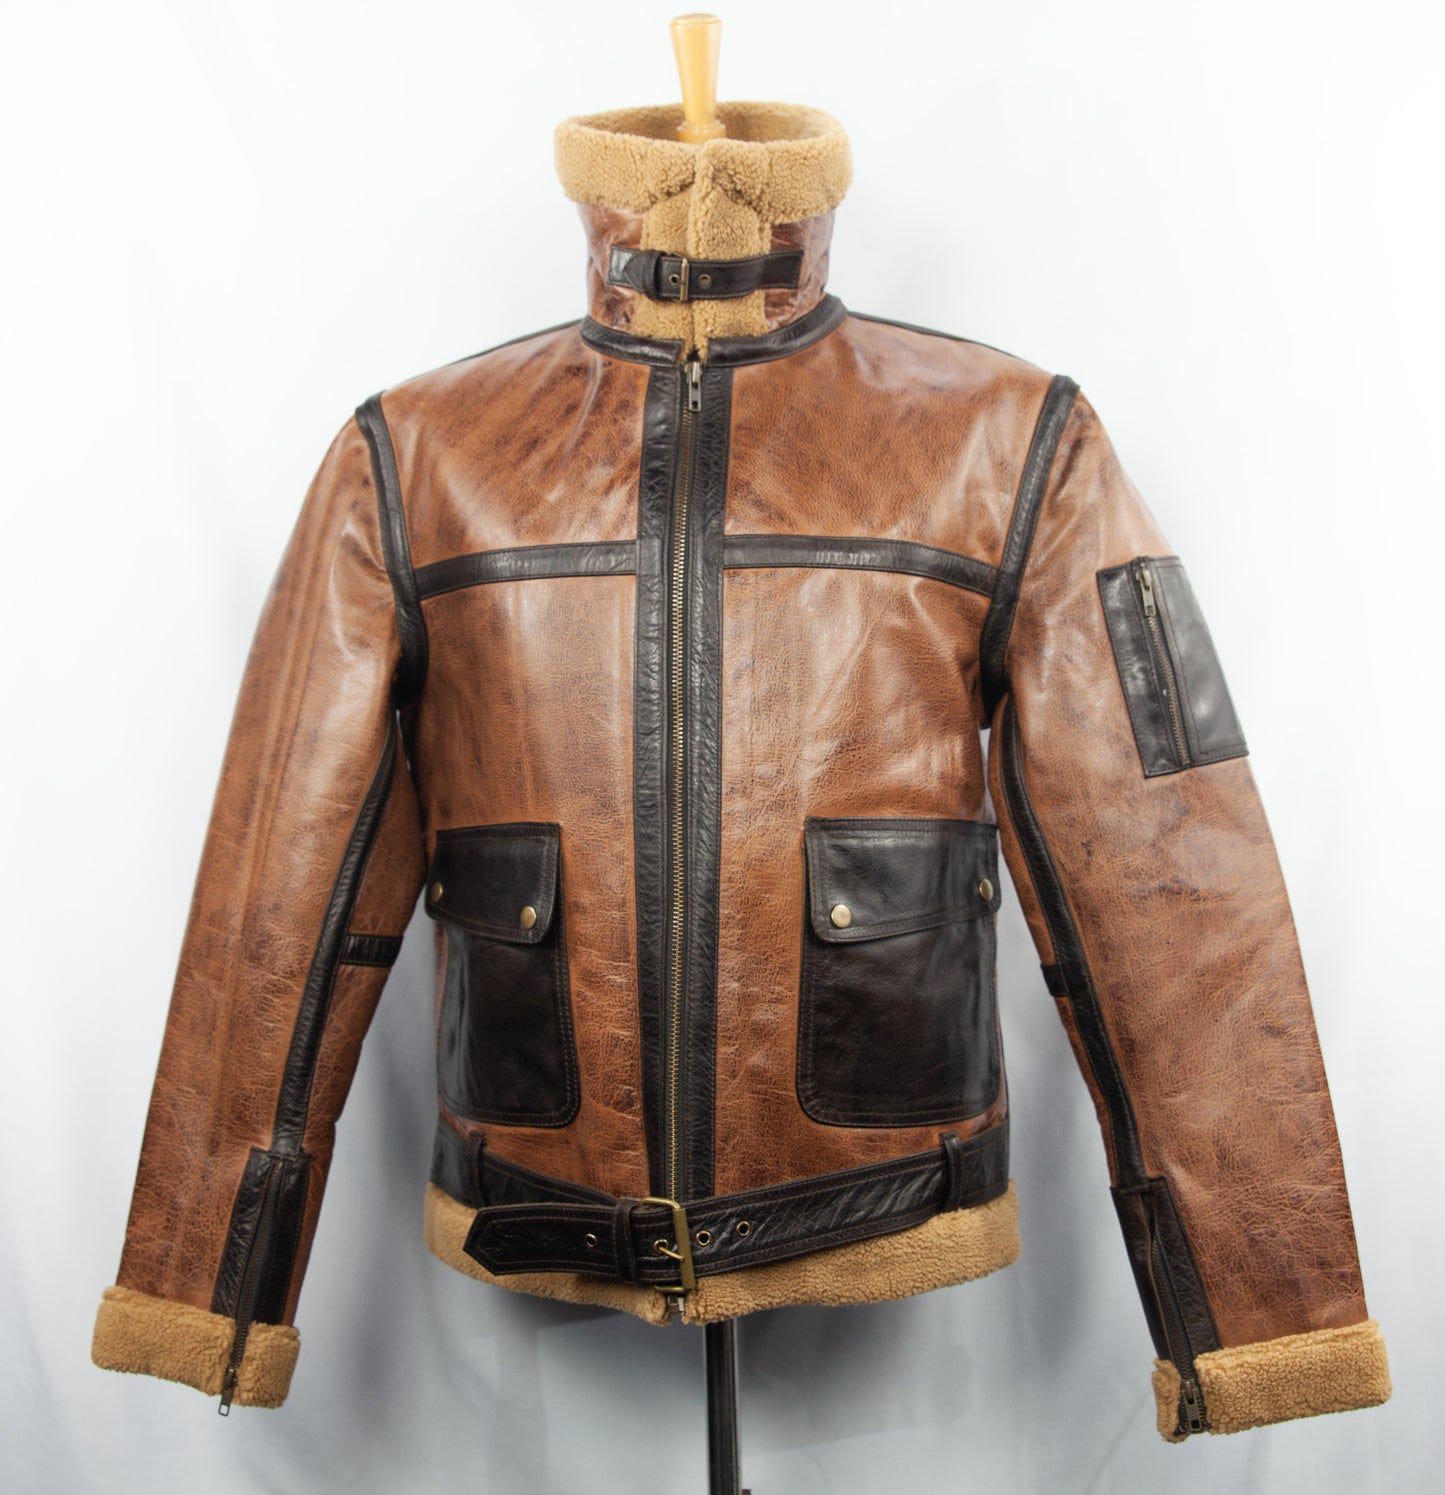 Aviator Brown Leather Jacket with Fur Collar